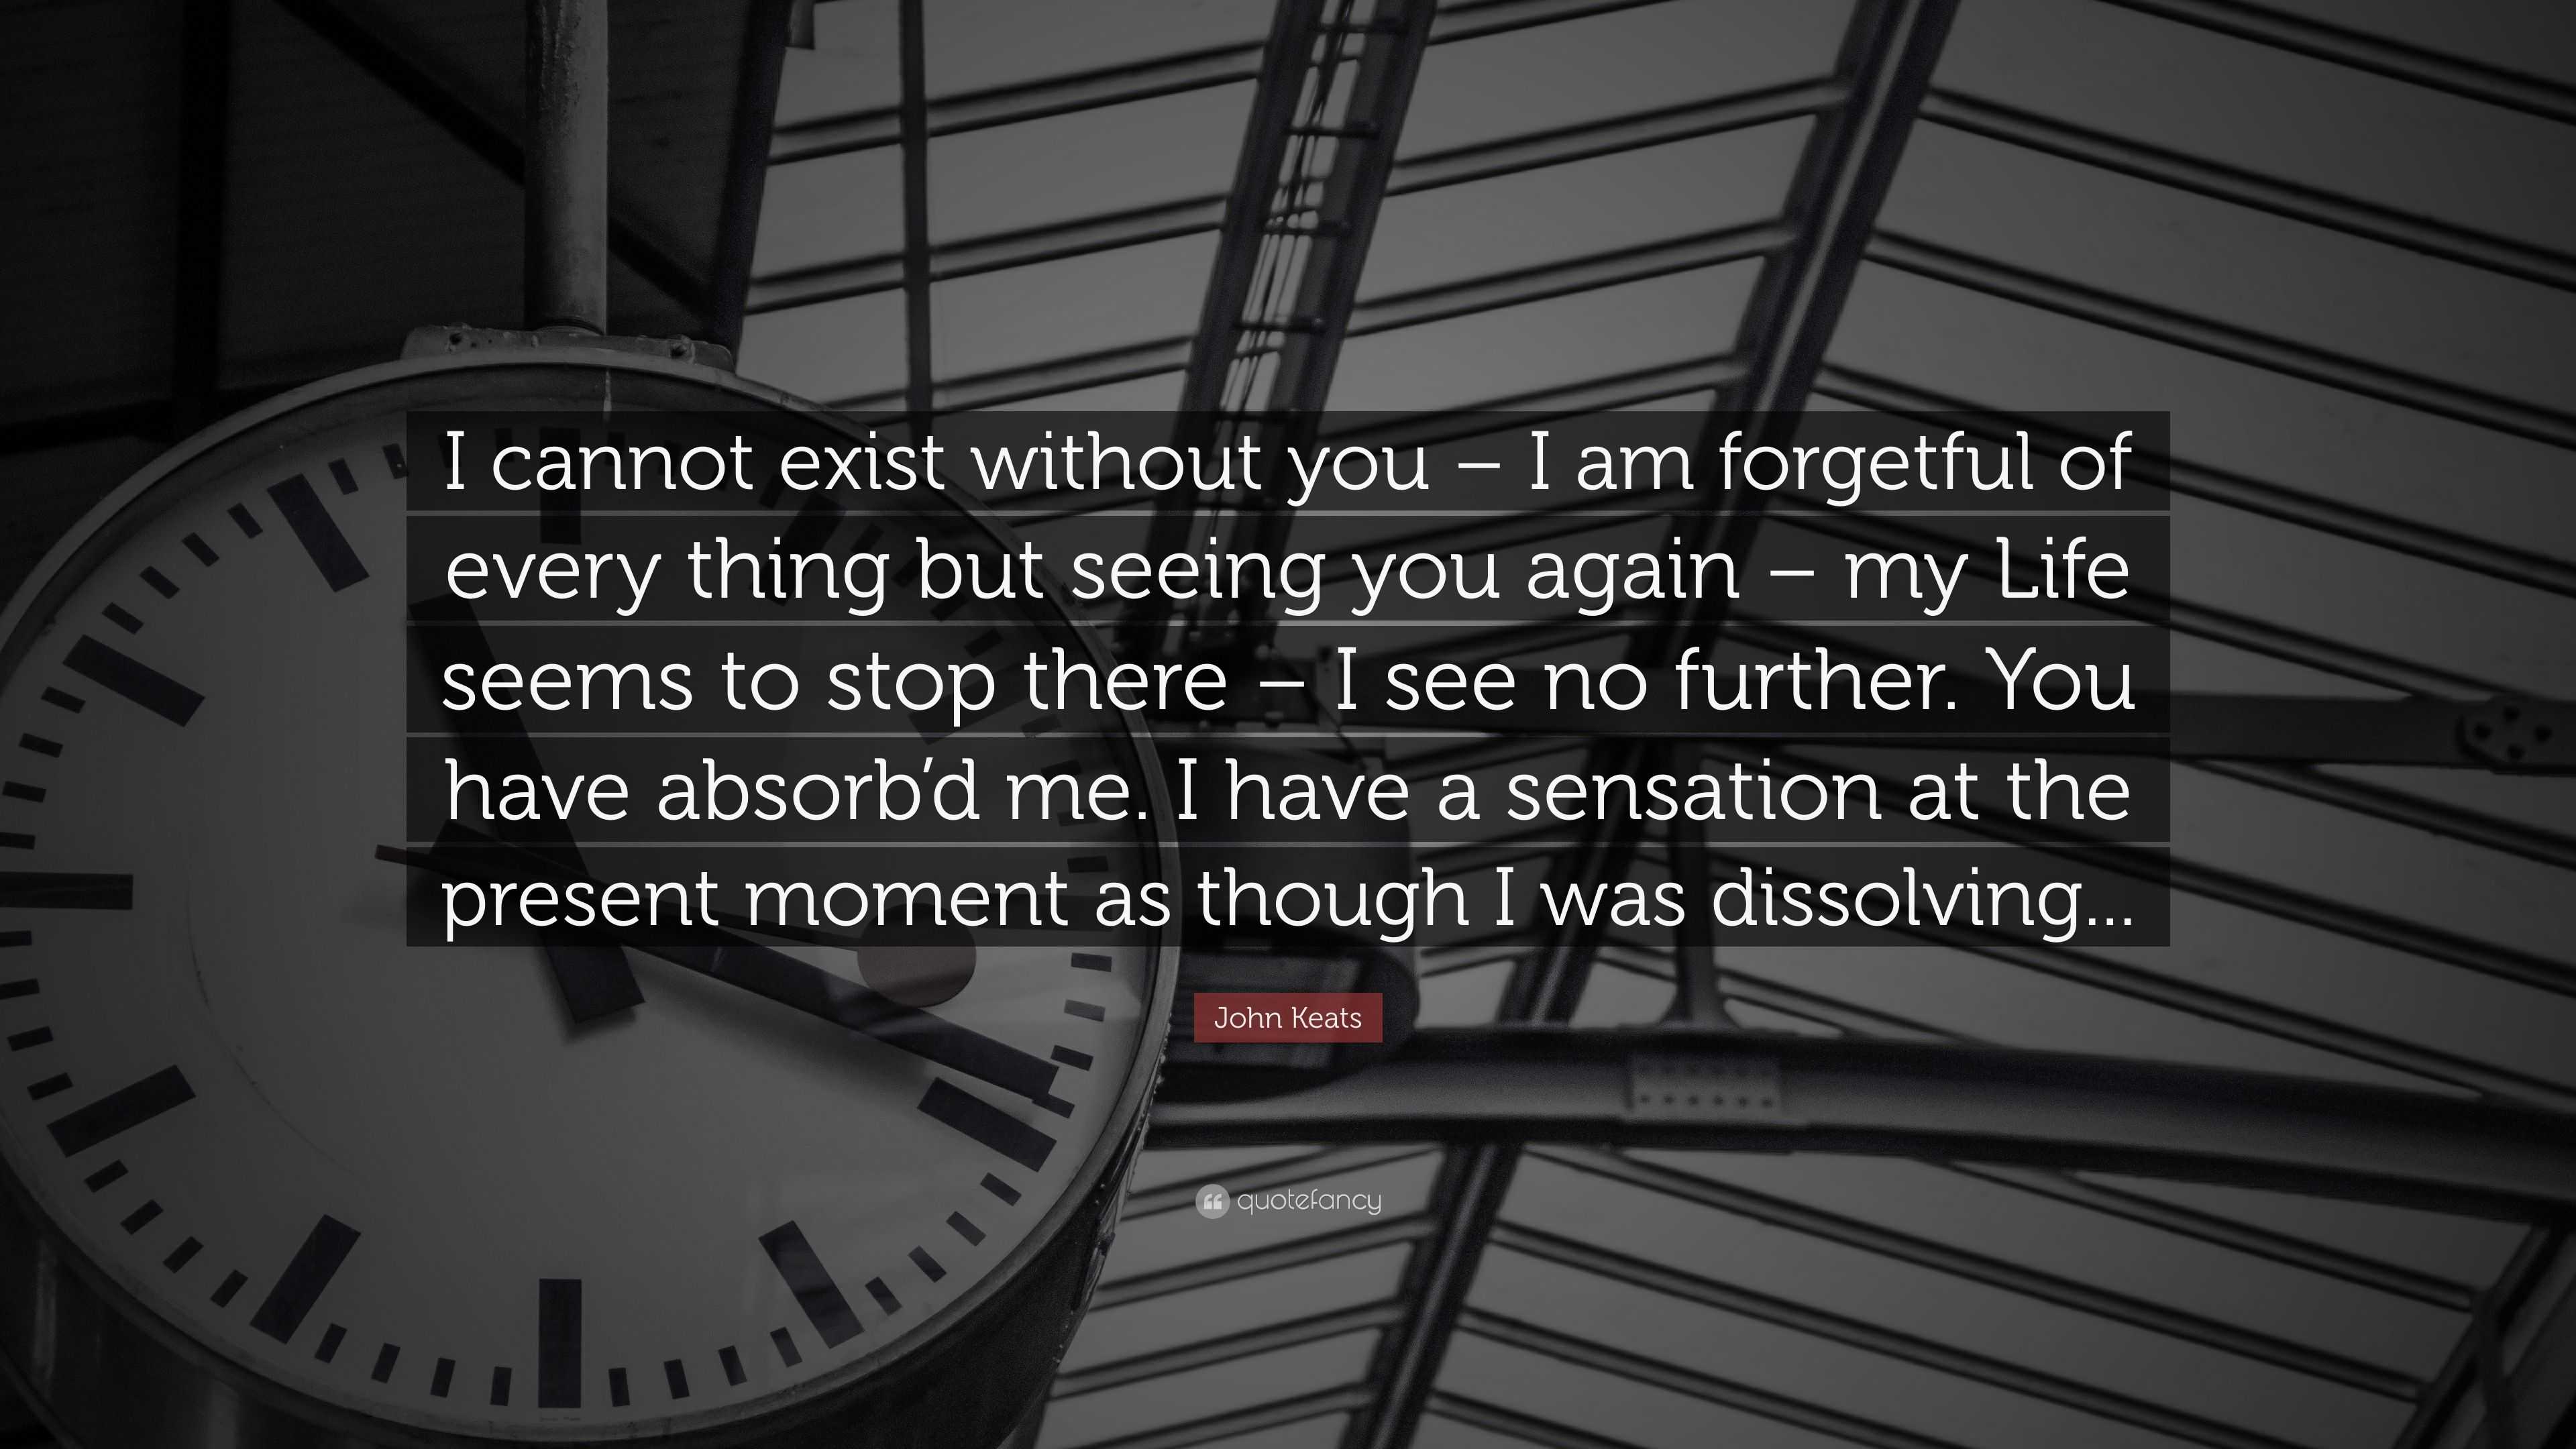 John Keats Quote: “I cannot exist without you – I am forgetful of every ...